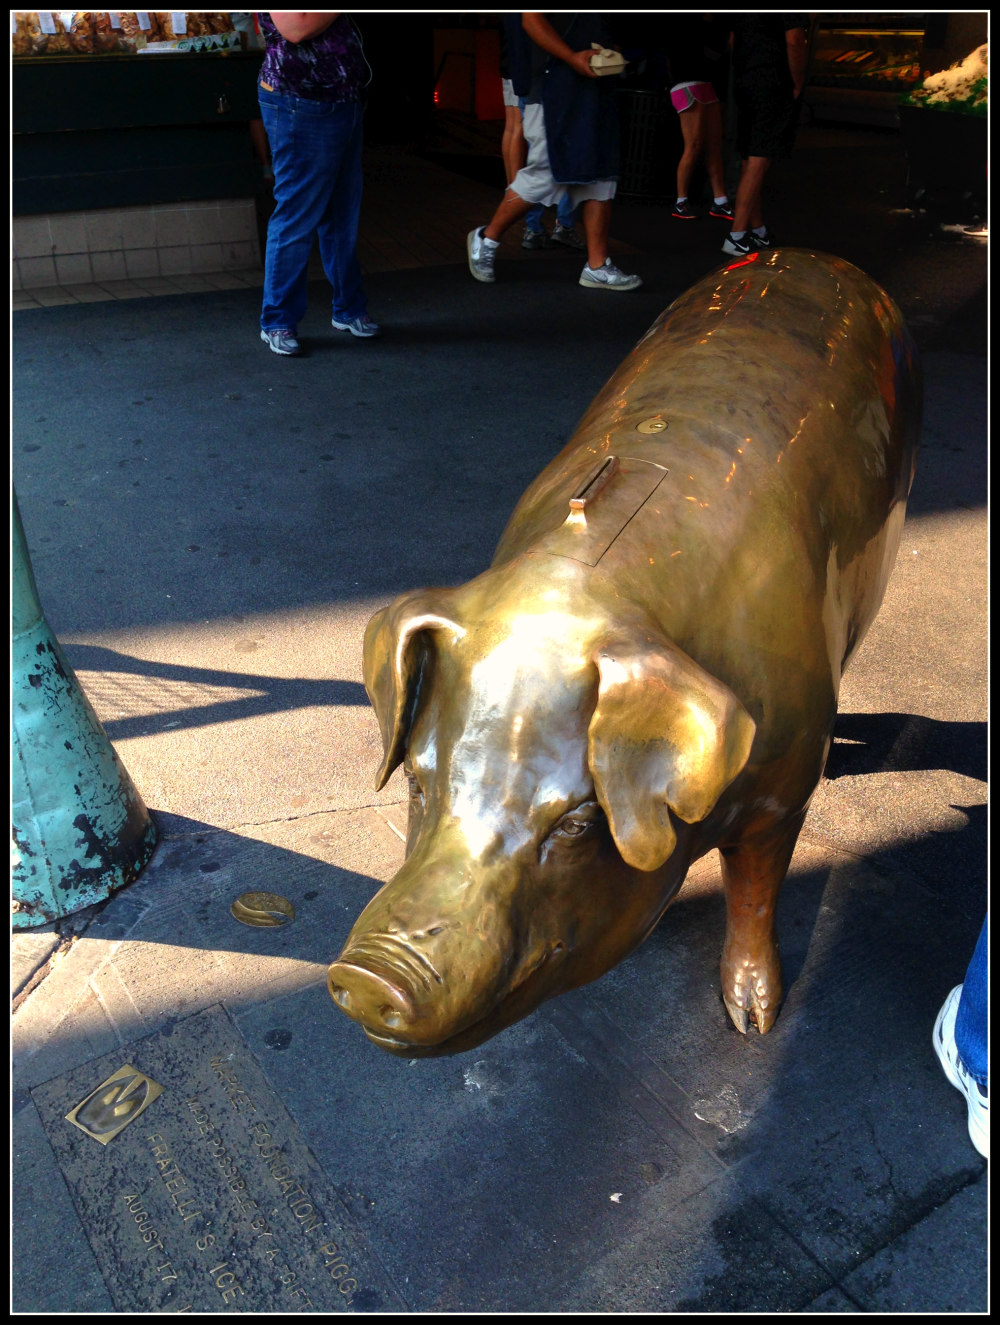 Rachel the Pig at Pike Place Market, Seattle, USA. Life Beyond Borders